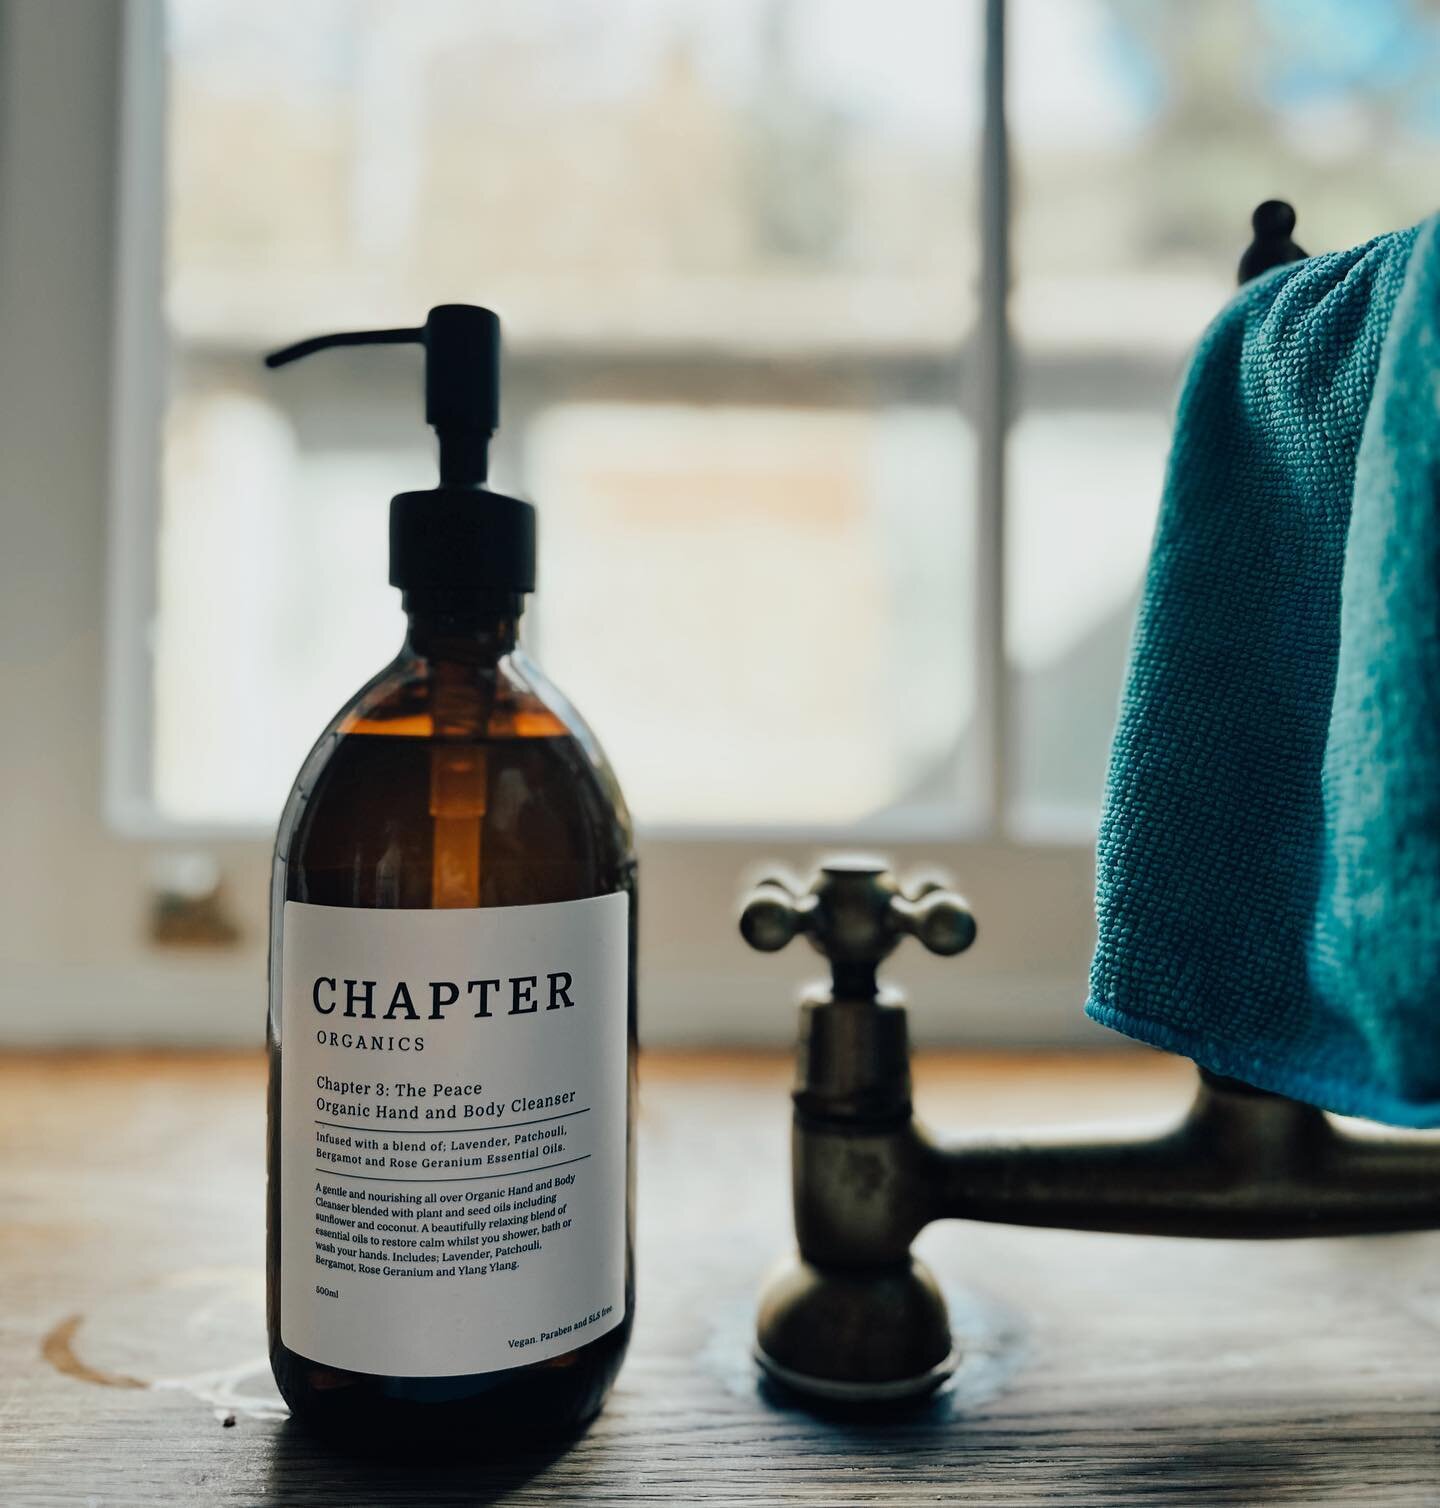 It&rsquo;s the finishing touches that make it home ❤️

We love giving our guests their very own @chapterorganics experience every time they stay 🥰

Happy Easter to all our guests visiting over the next few weeks! 🐣

#Matlock #matlockbath #peakdistr